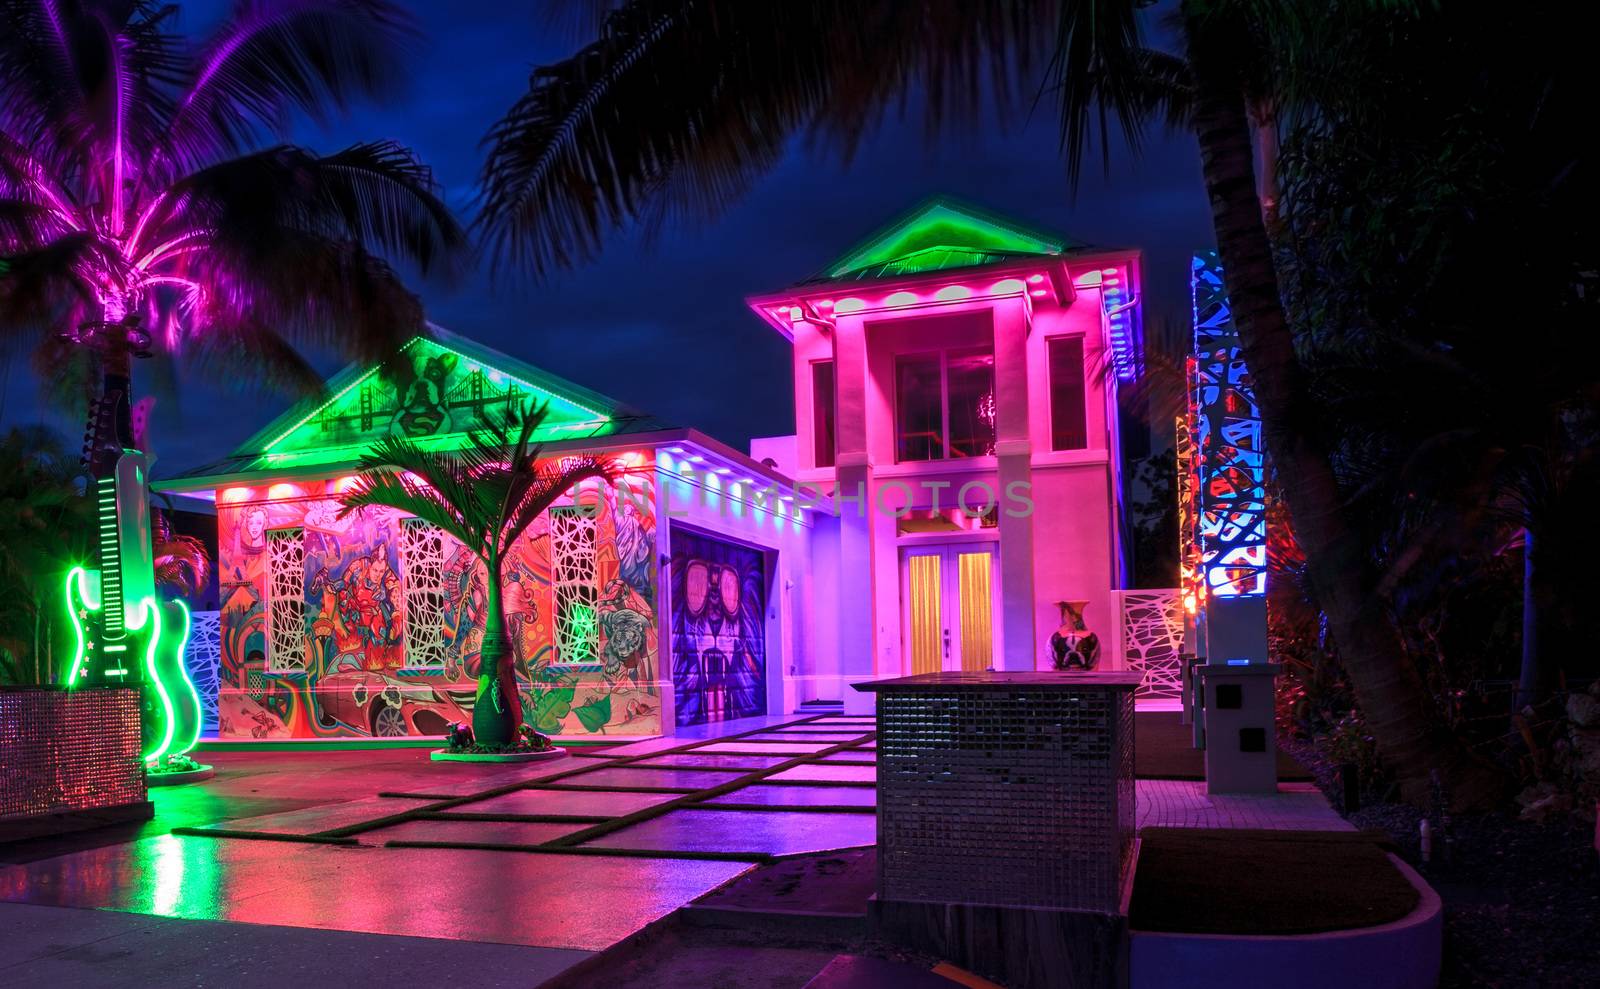 Naples, Florida, USA – October 23, 2020: Fun, colorful, artistic house done in the creative style of Las Vegas with neon lights sits in Naples Park, Florida. Editorial use only.